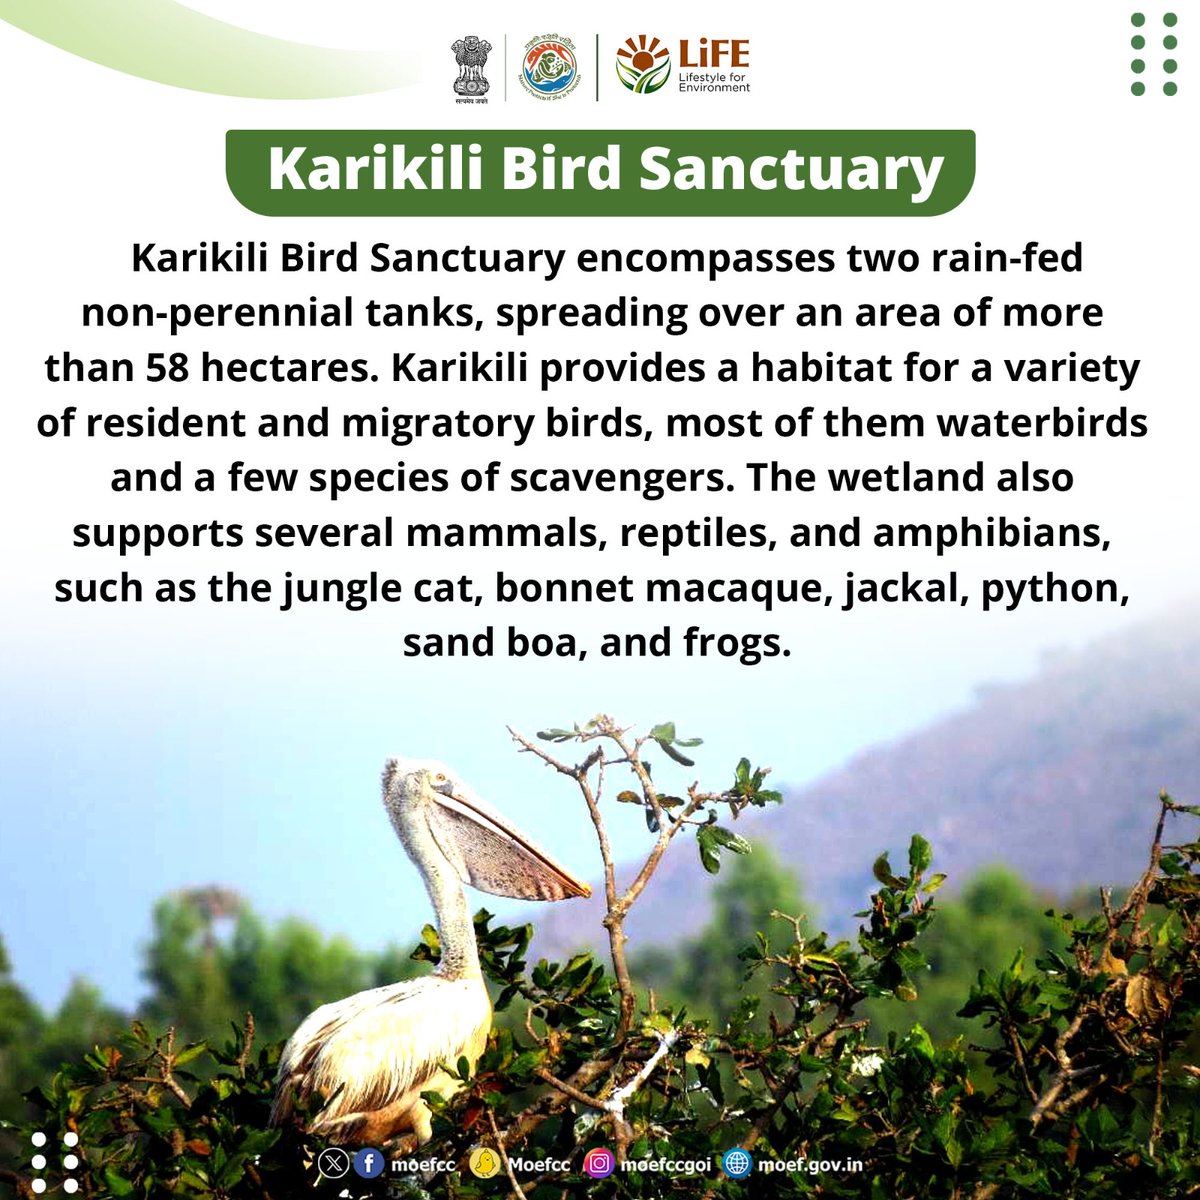 Discovering India's Ramsar Sites  

Day 66: Karikili Bird Sanctuary

From wetlands to wildlife, each site is a unique haven for nature. Let's celebrate and safeguard these vital ecosystems together!  

#RamsarSites #MissionLiFE #ProPlanetPeople